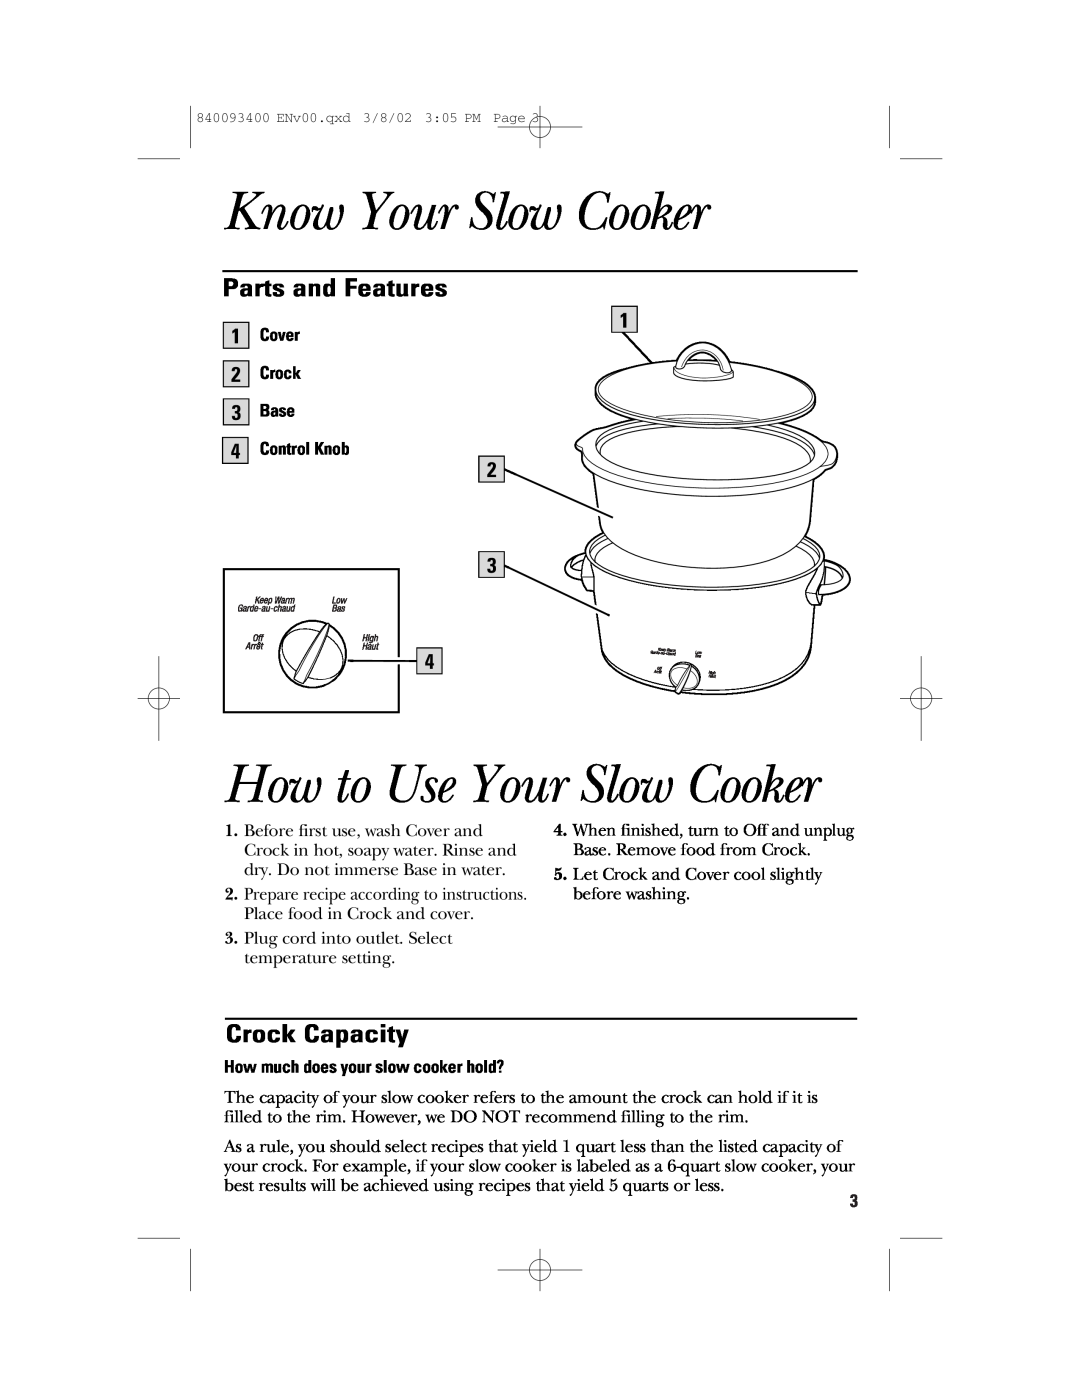 GE 840093400, 106724 manual Know Your Slow Cooker, How to Use Your Slow Cooker, Parts and Features, Crock Capacity 